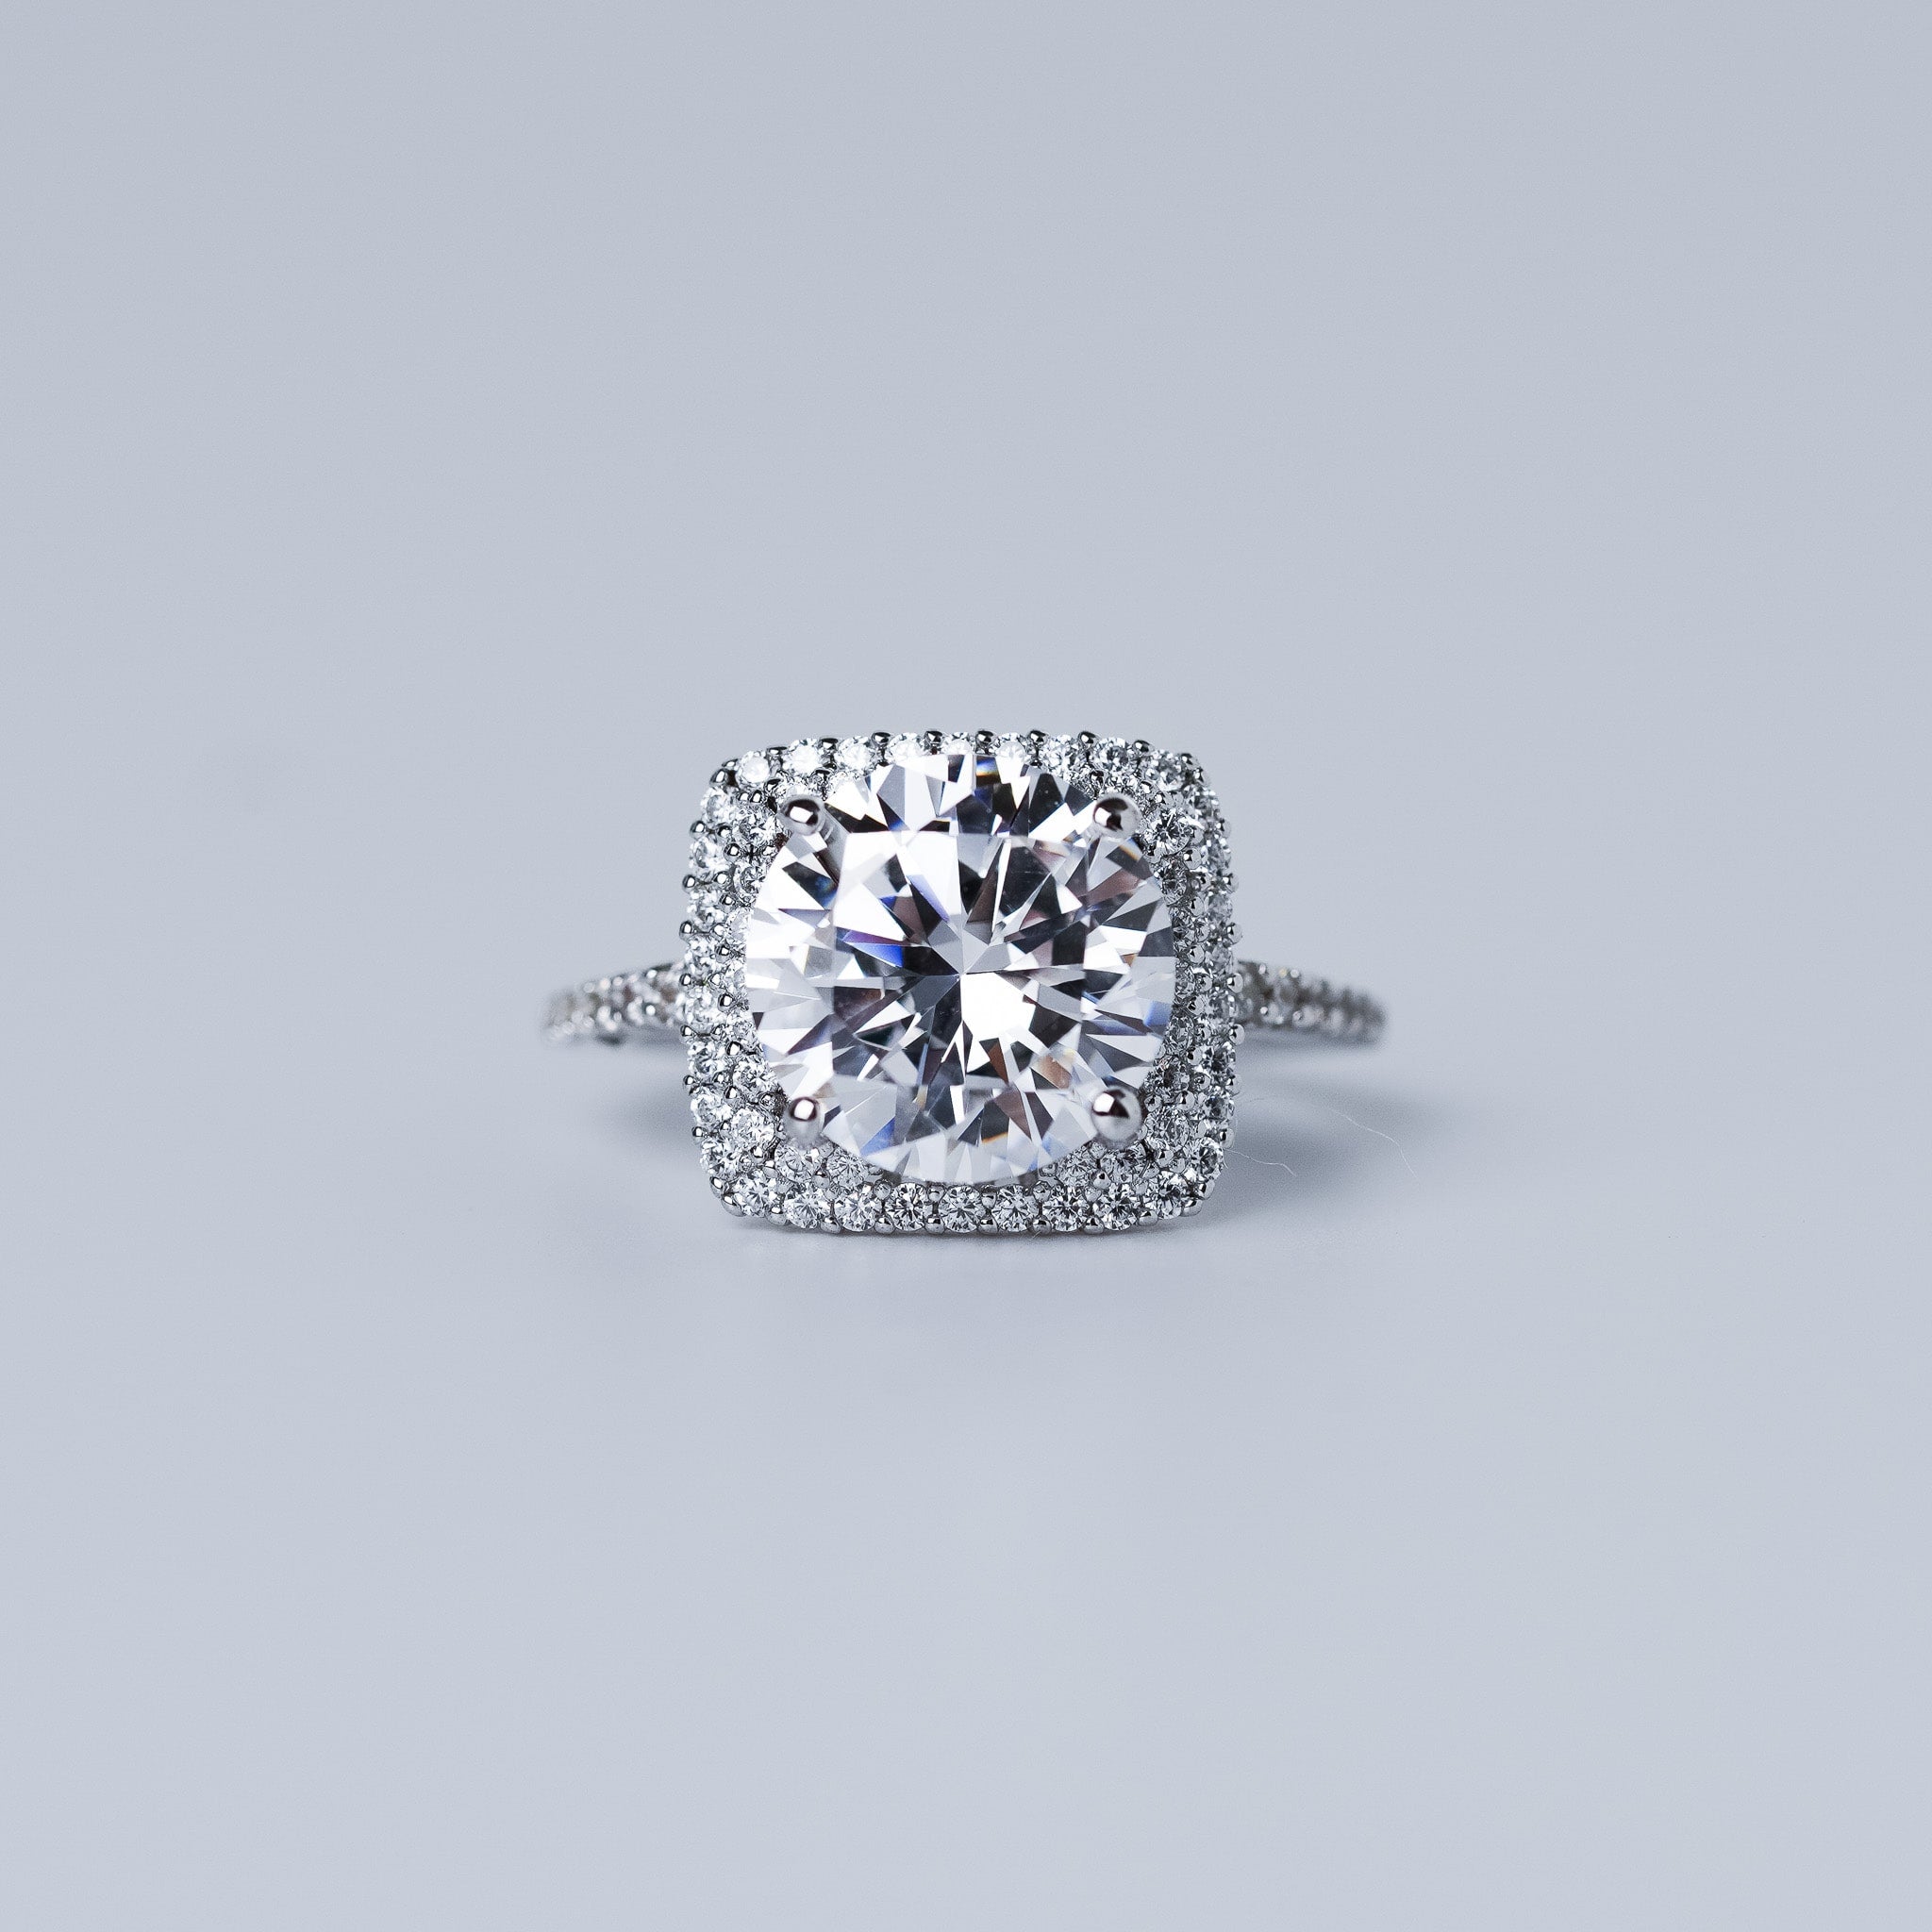 Double Halo Ring - 4 ct